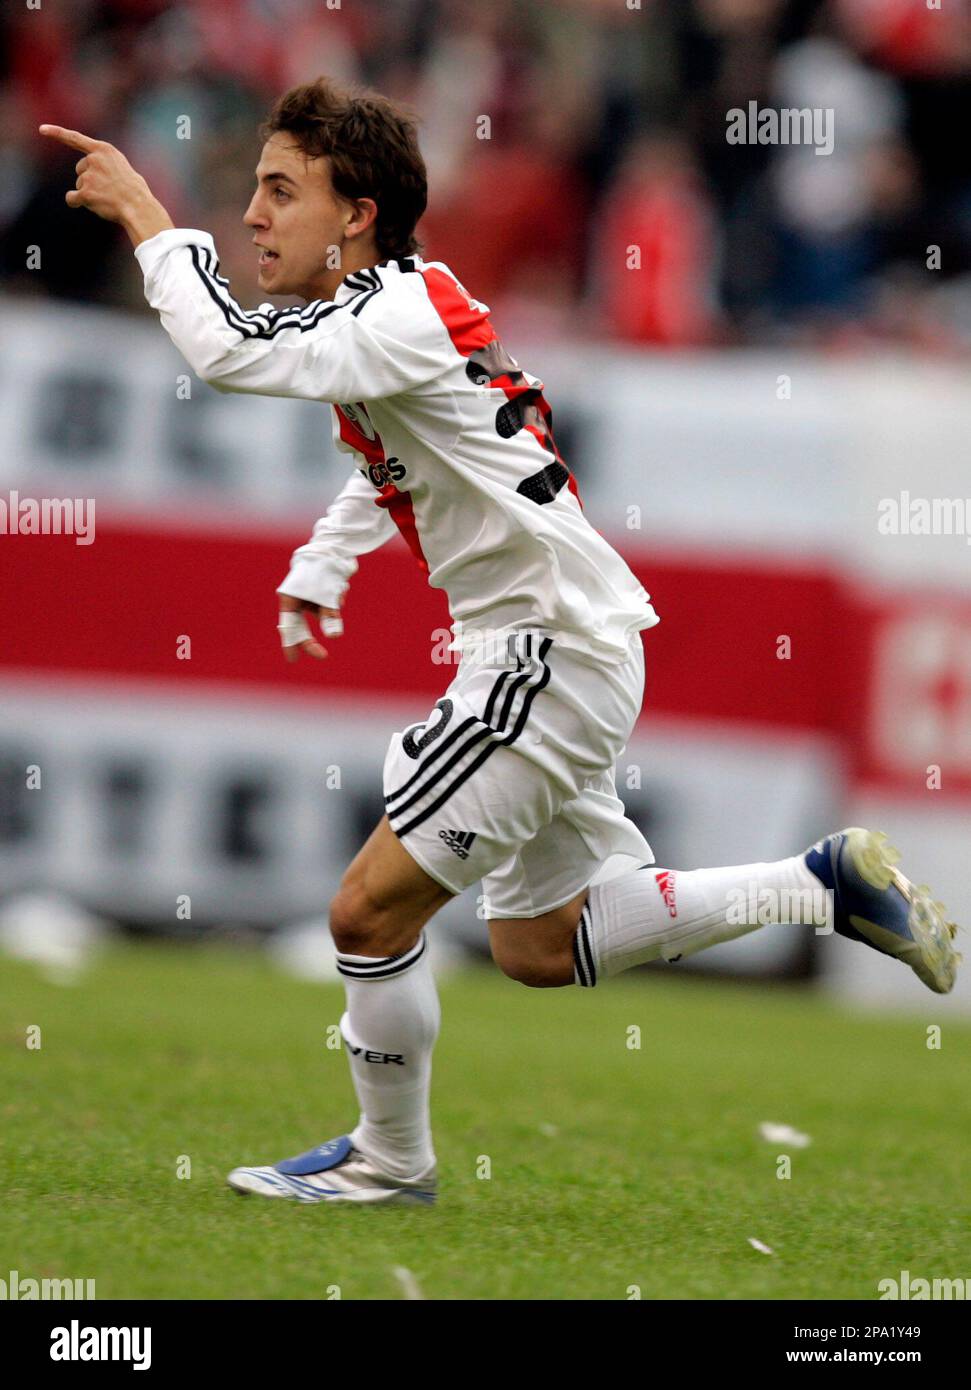 River Plate's Diego Buonanotte celebrates after scoring against Olimpo de  Bahia Blanca during an Argentina first division soccer match in Buenos  Aires, Sunday, June 8, 2008. (AP Photo/Natacha Pisarenko Stock Photo - Alamy